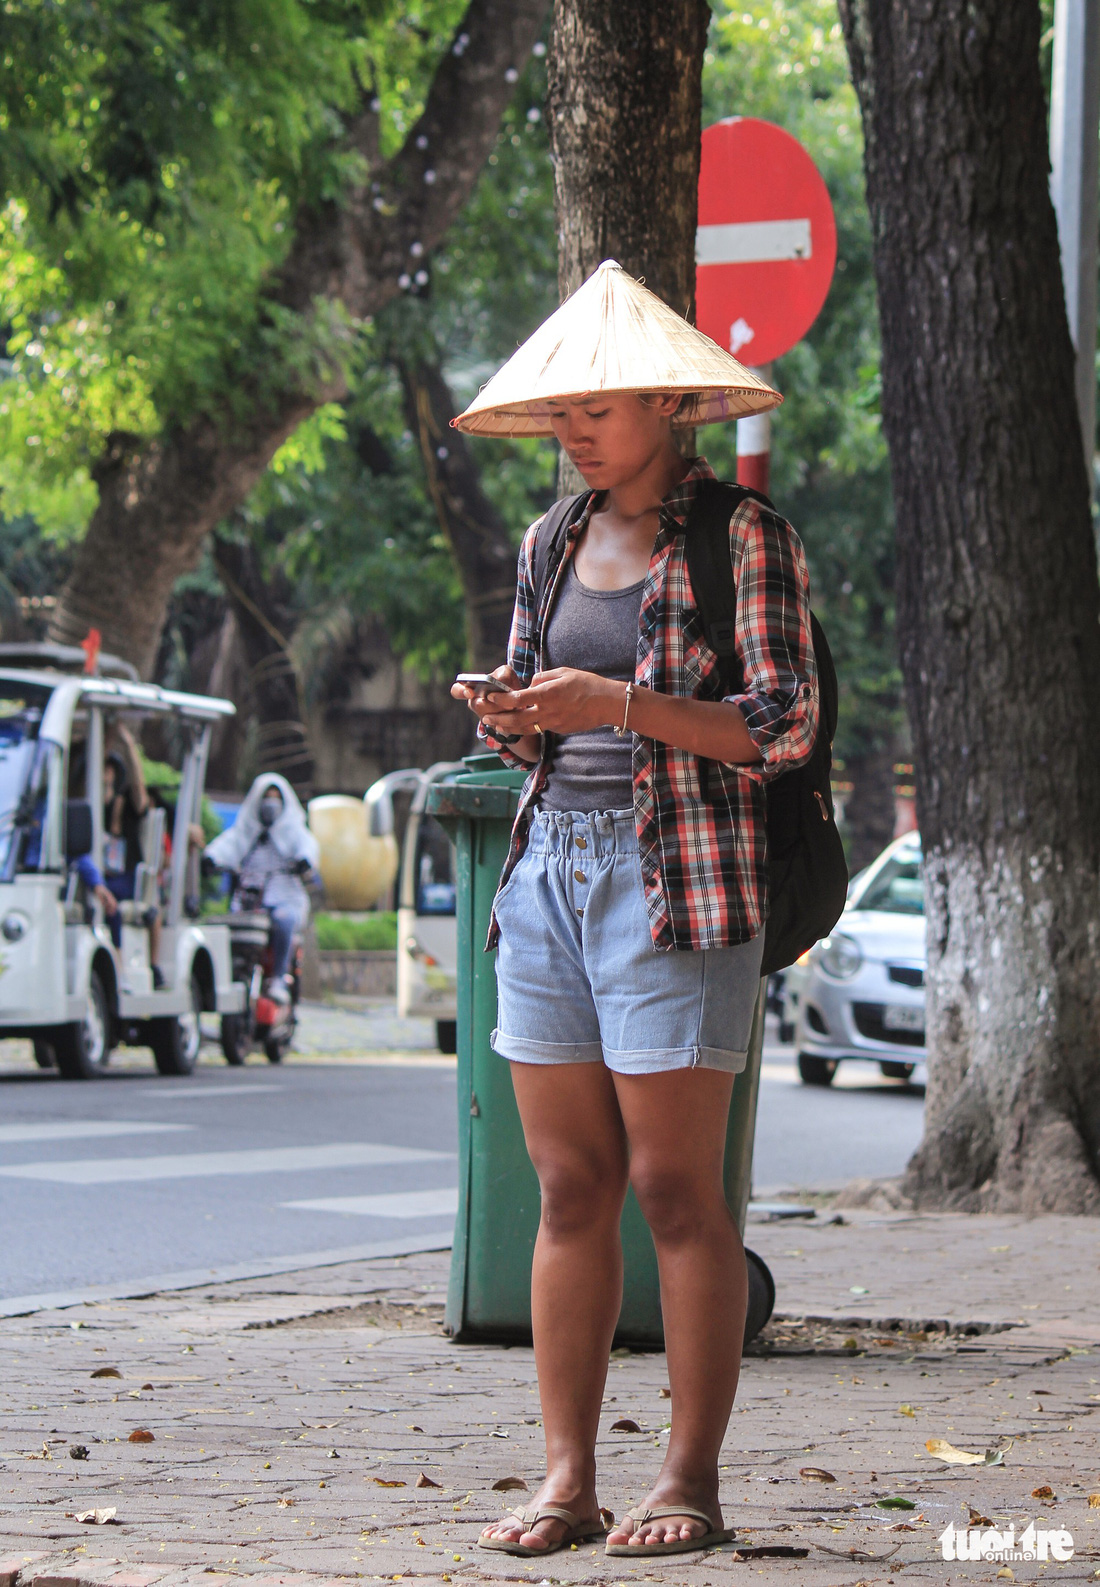 A foreign woman knit her brows under the sweltering heat in Hanoi. Photo: Tuoi Tre